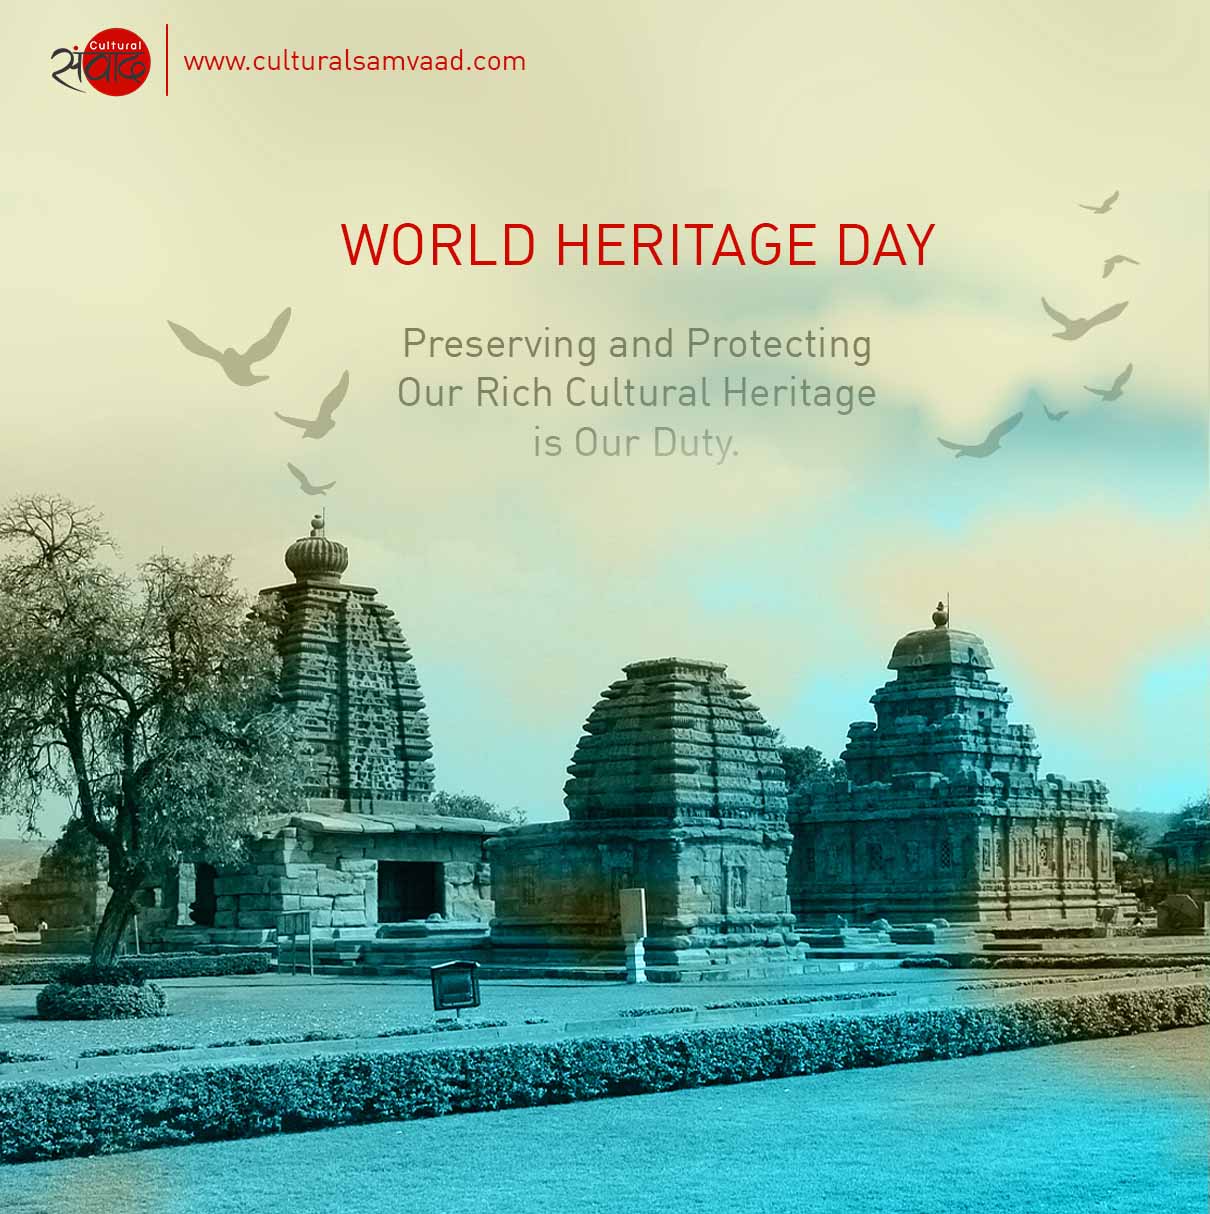 World Heritage Day India Is Home To 42 Unesco World Heritage Sites Cultural Samvaad Indian 6031